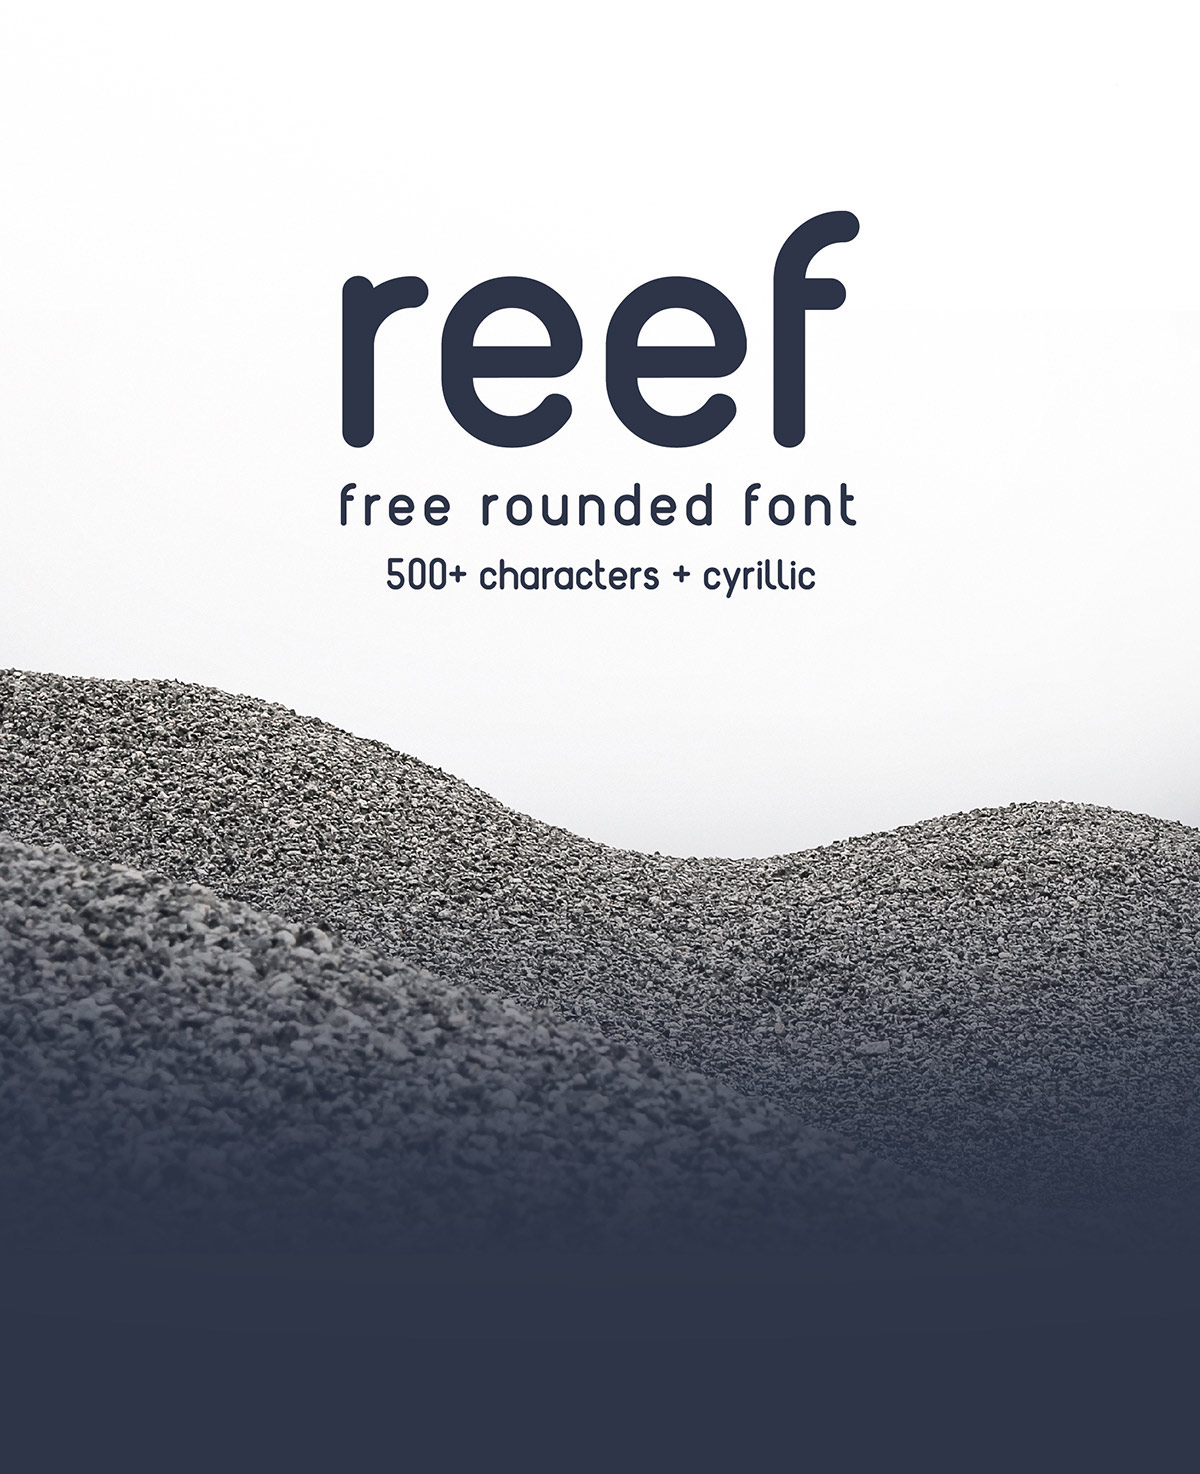 font free download reef Typeface rounded design graphic poster Cyrillic russian latvian latin extended